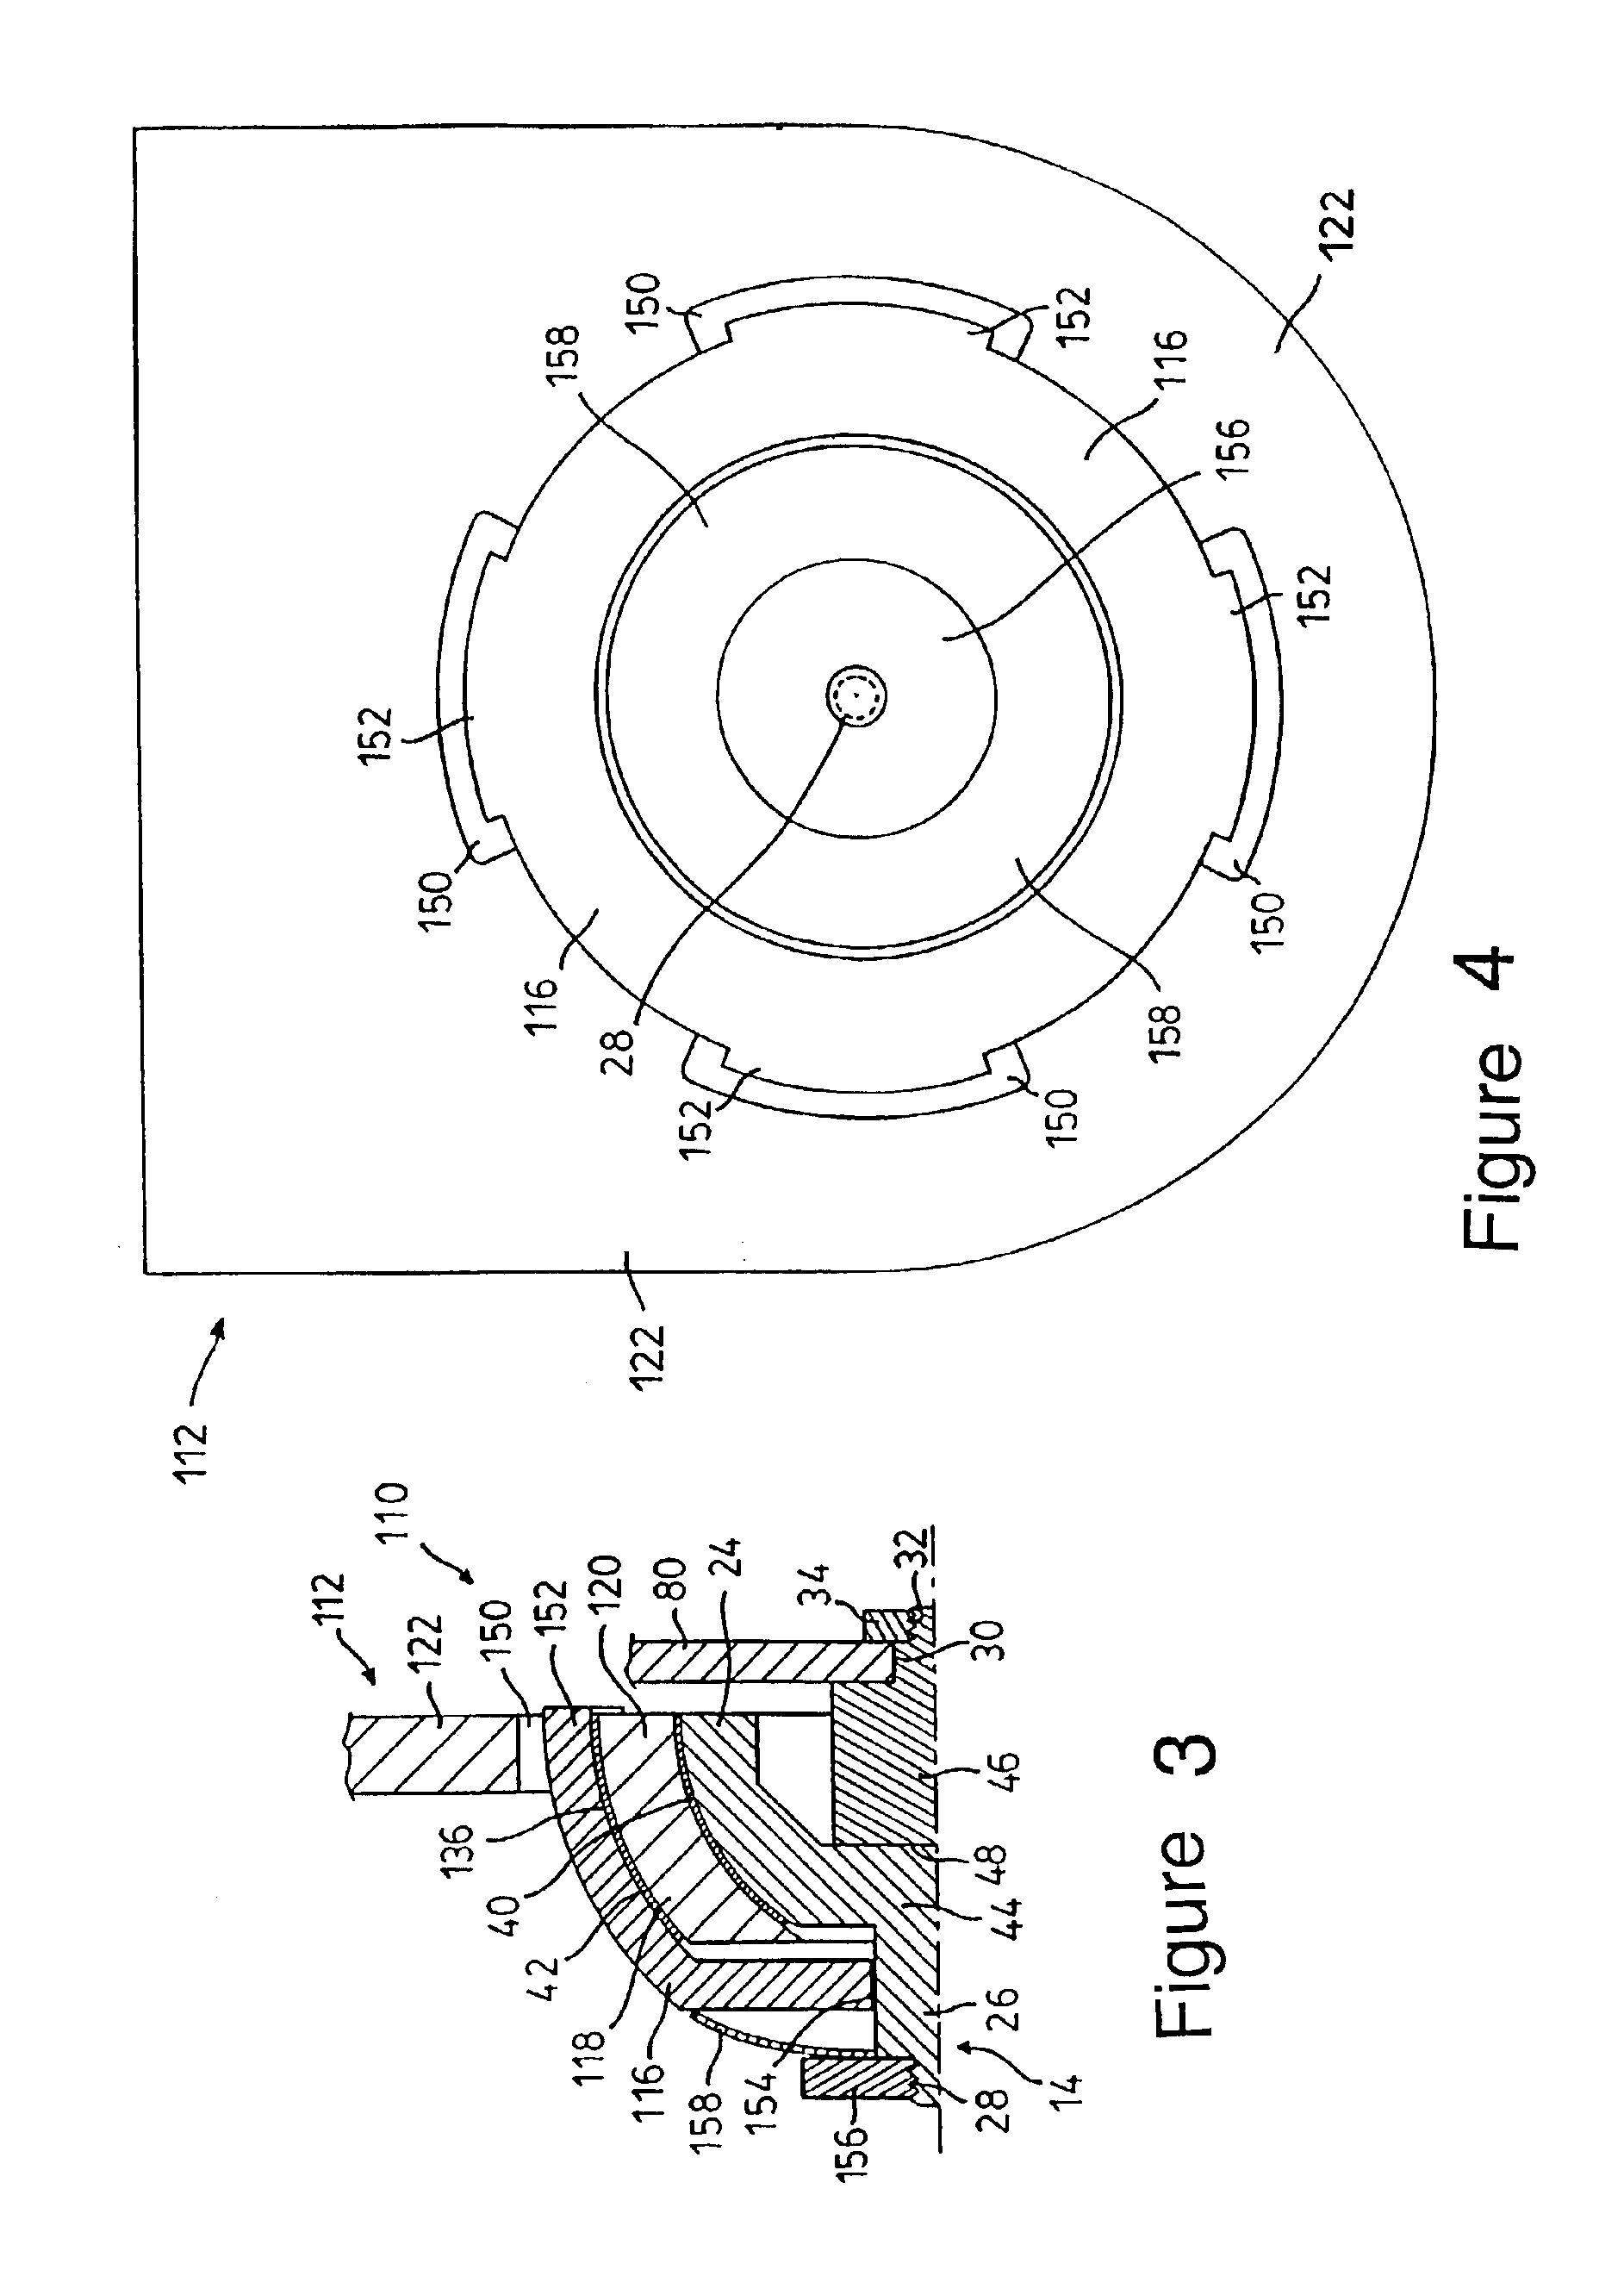 Measurement device and seating arrangement